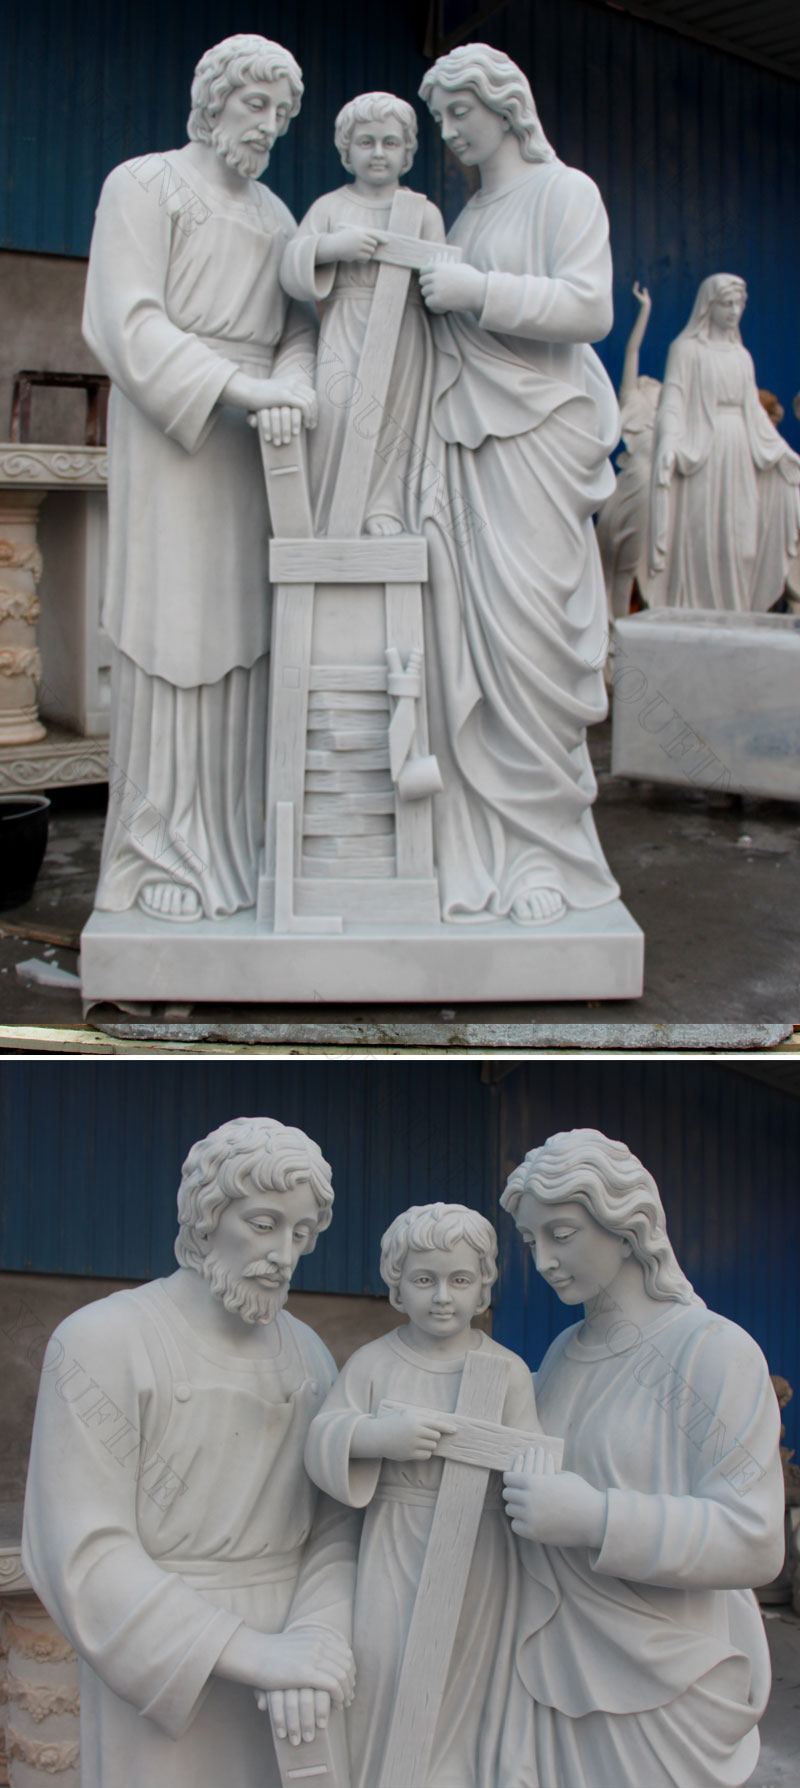 Holy family of mary joseph and baby jesus statues details